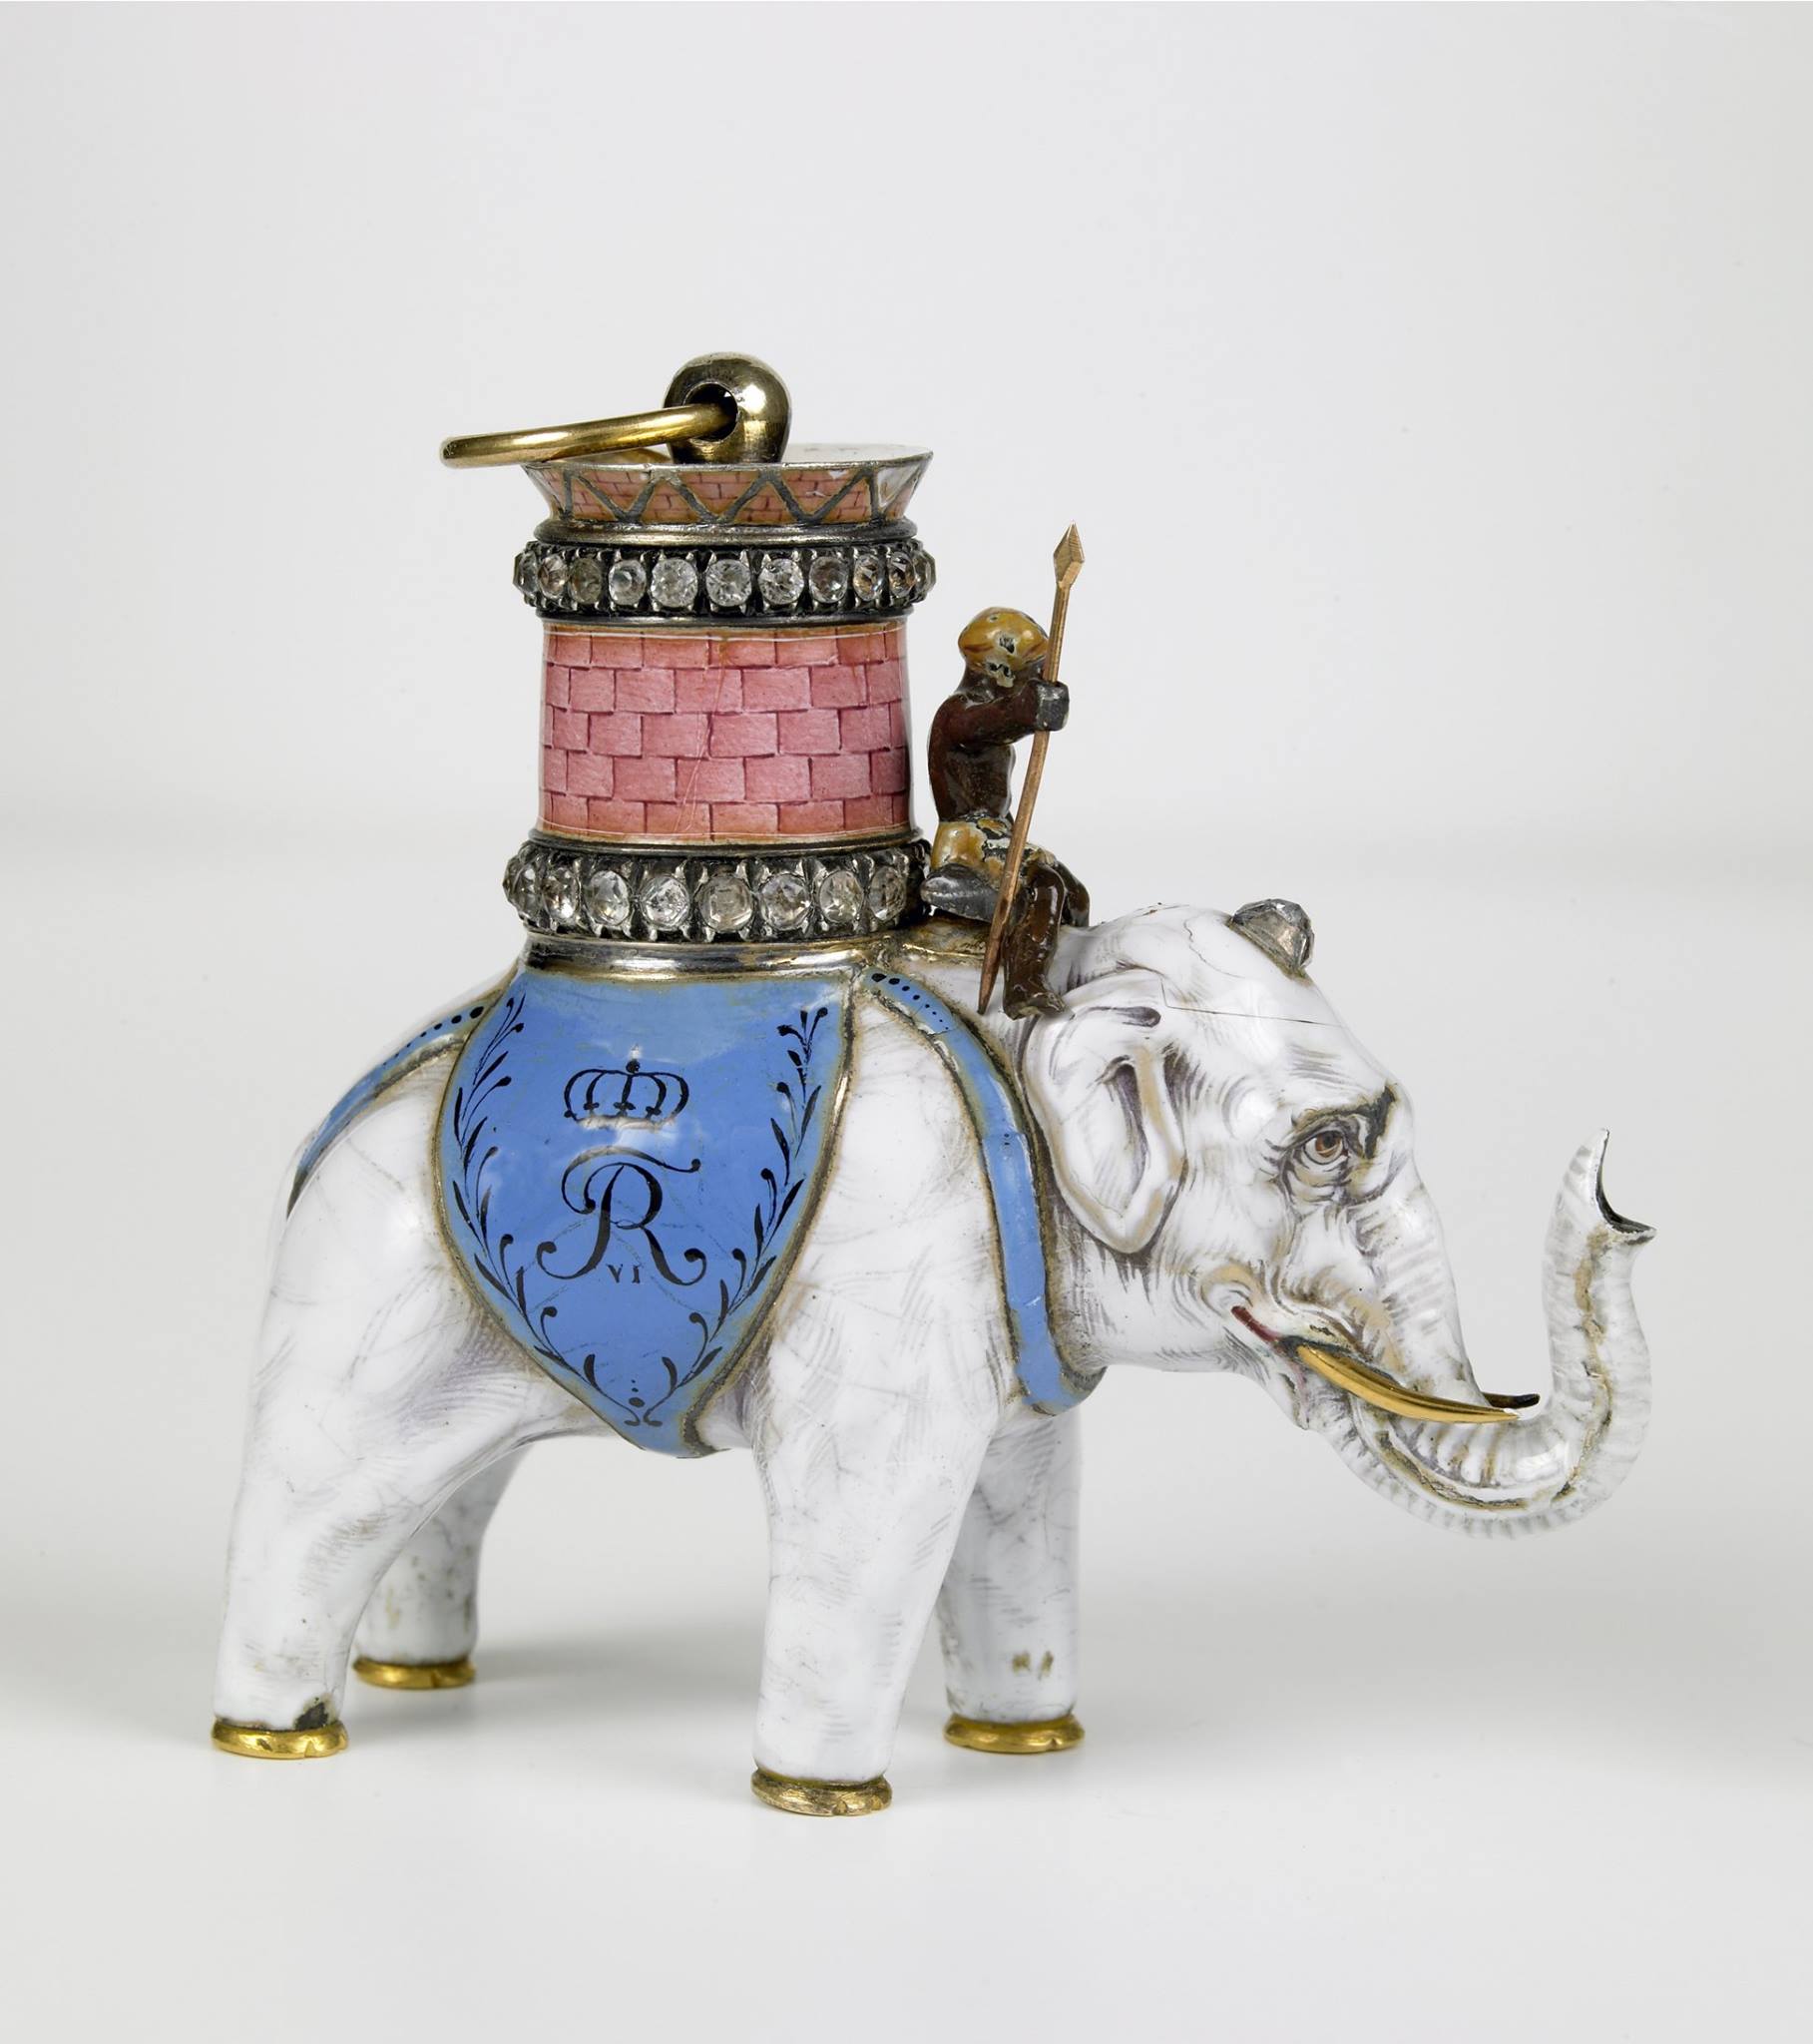 Louis XVIII's Order of the Elephant from the Louvre  collection.jpg